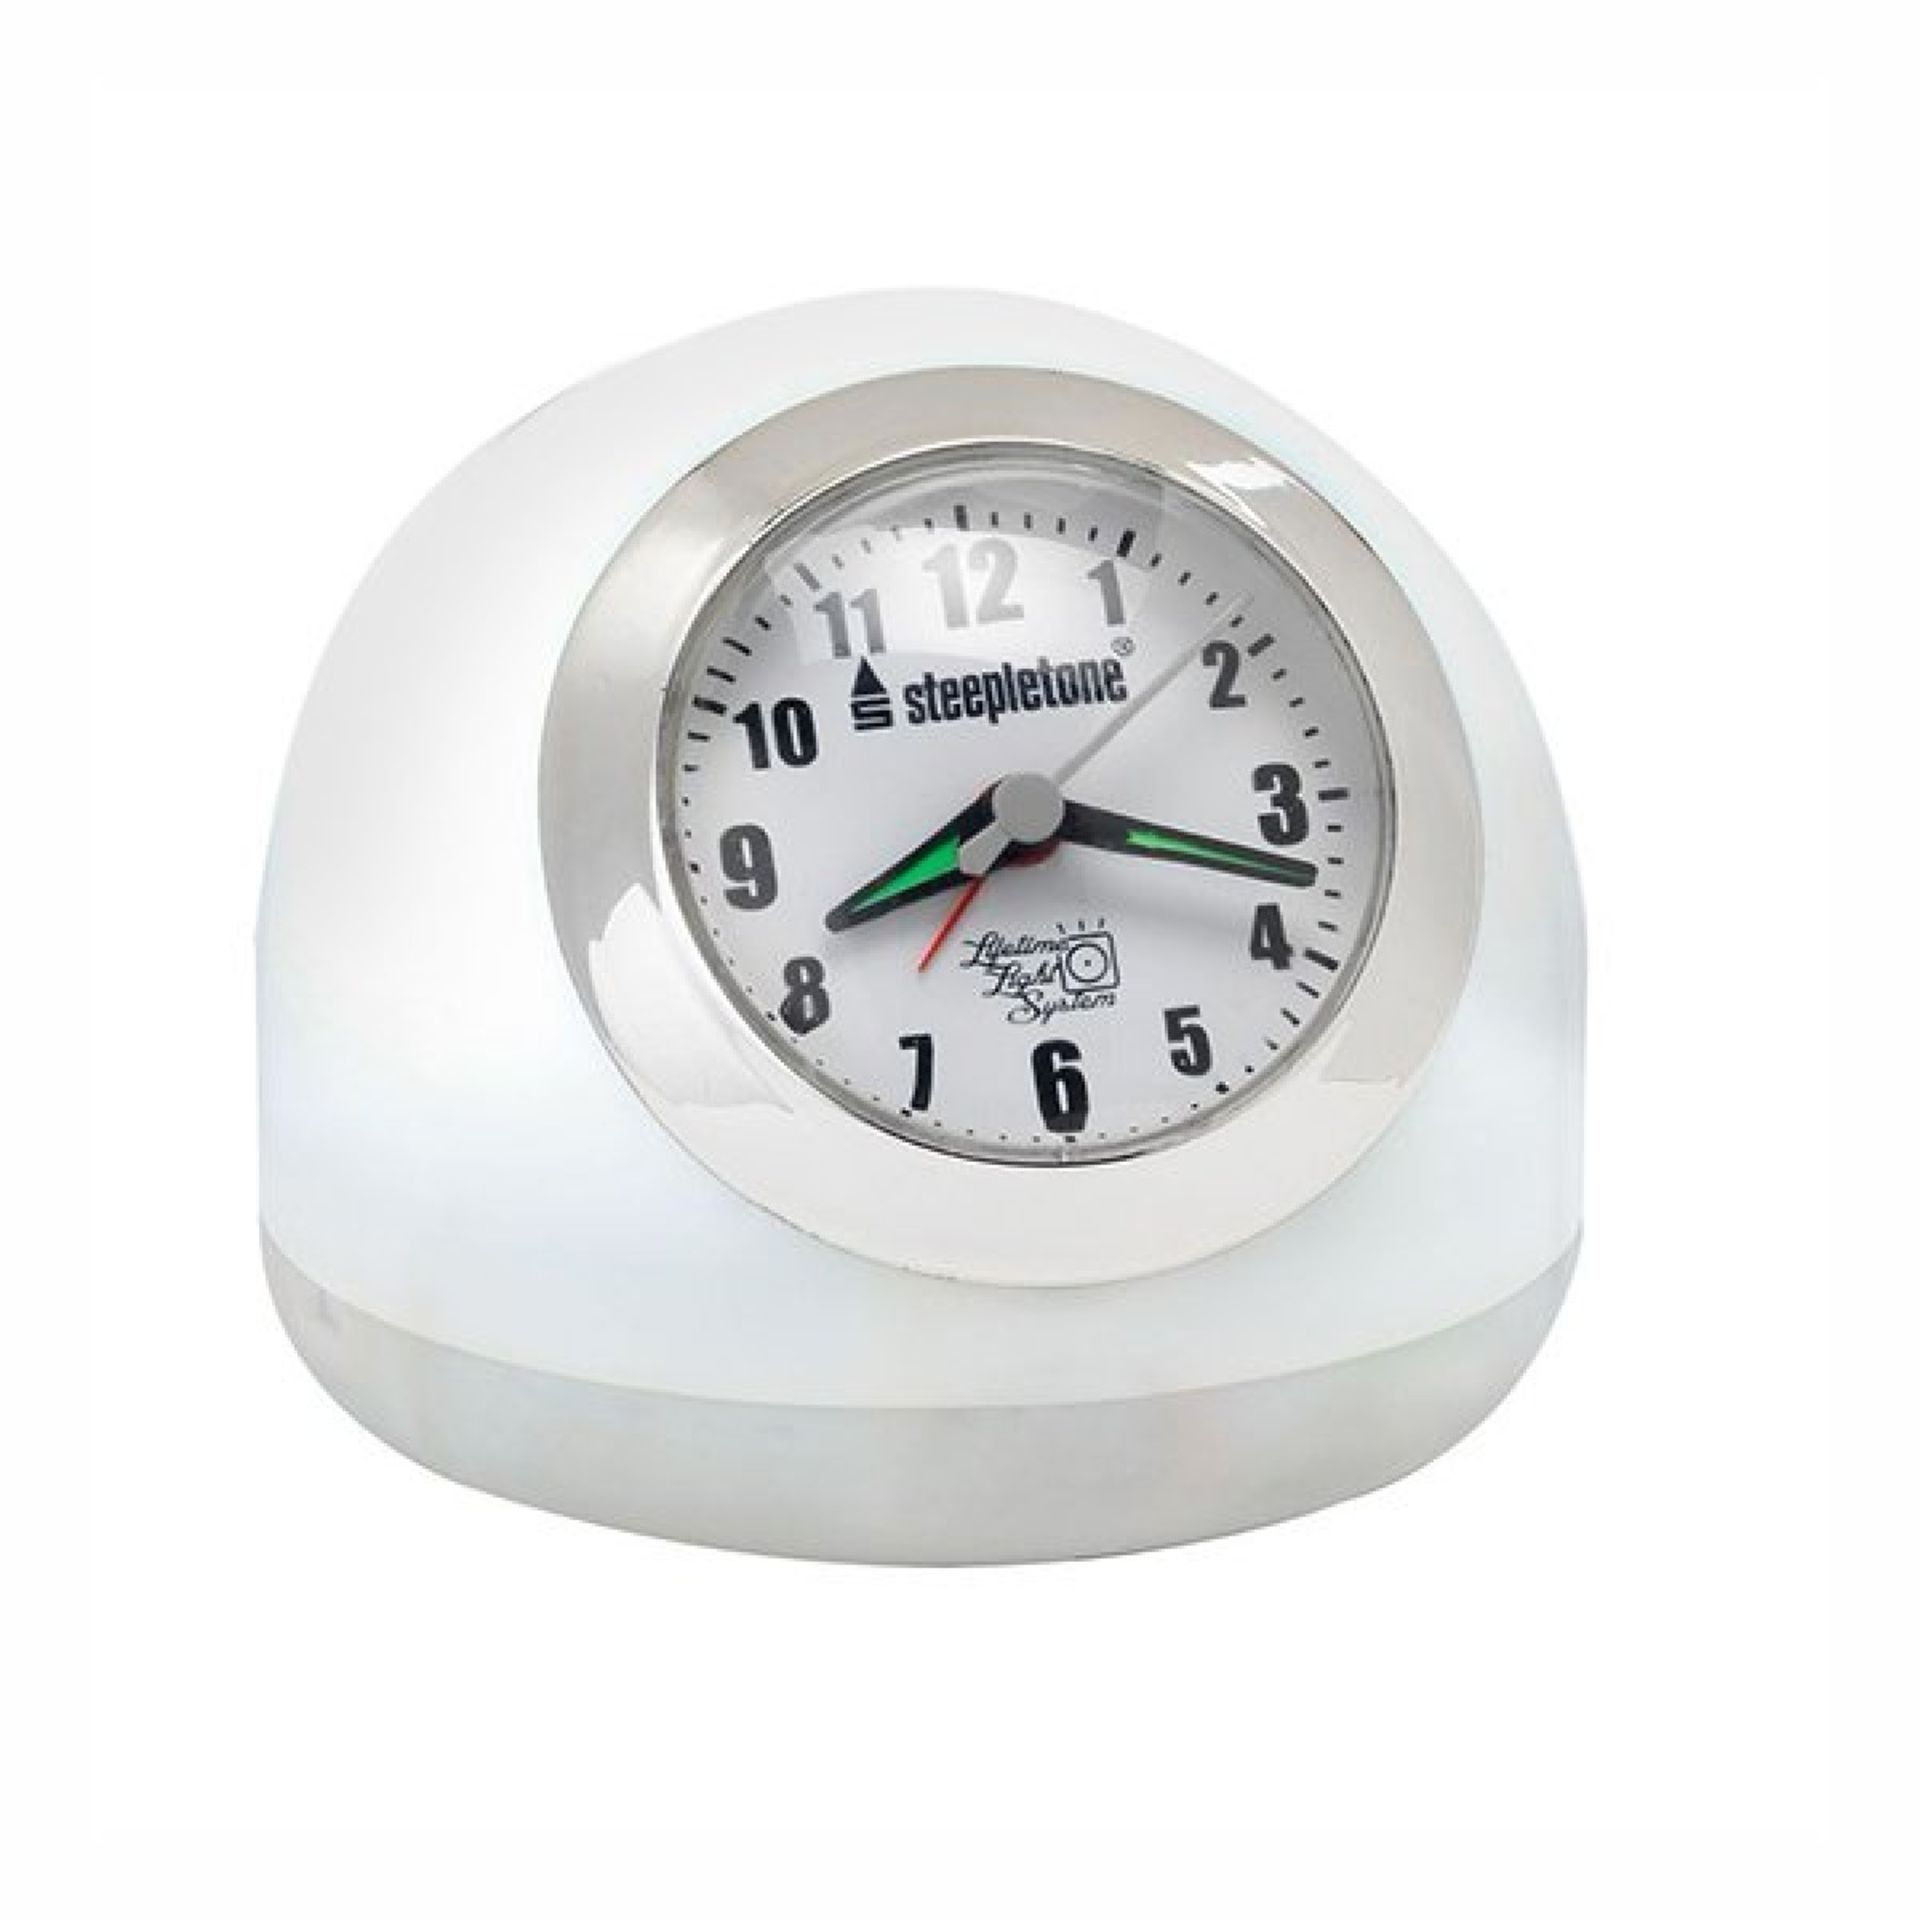 V Brand New LED Touch Controlled Clock Alarm With Radio & Touch Control White & Mood Lighting (Radio